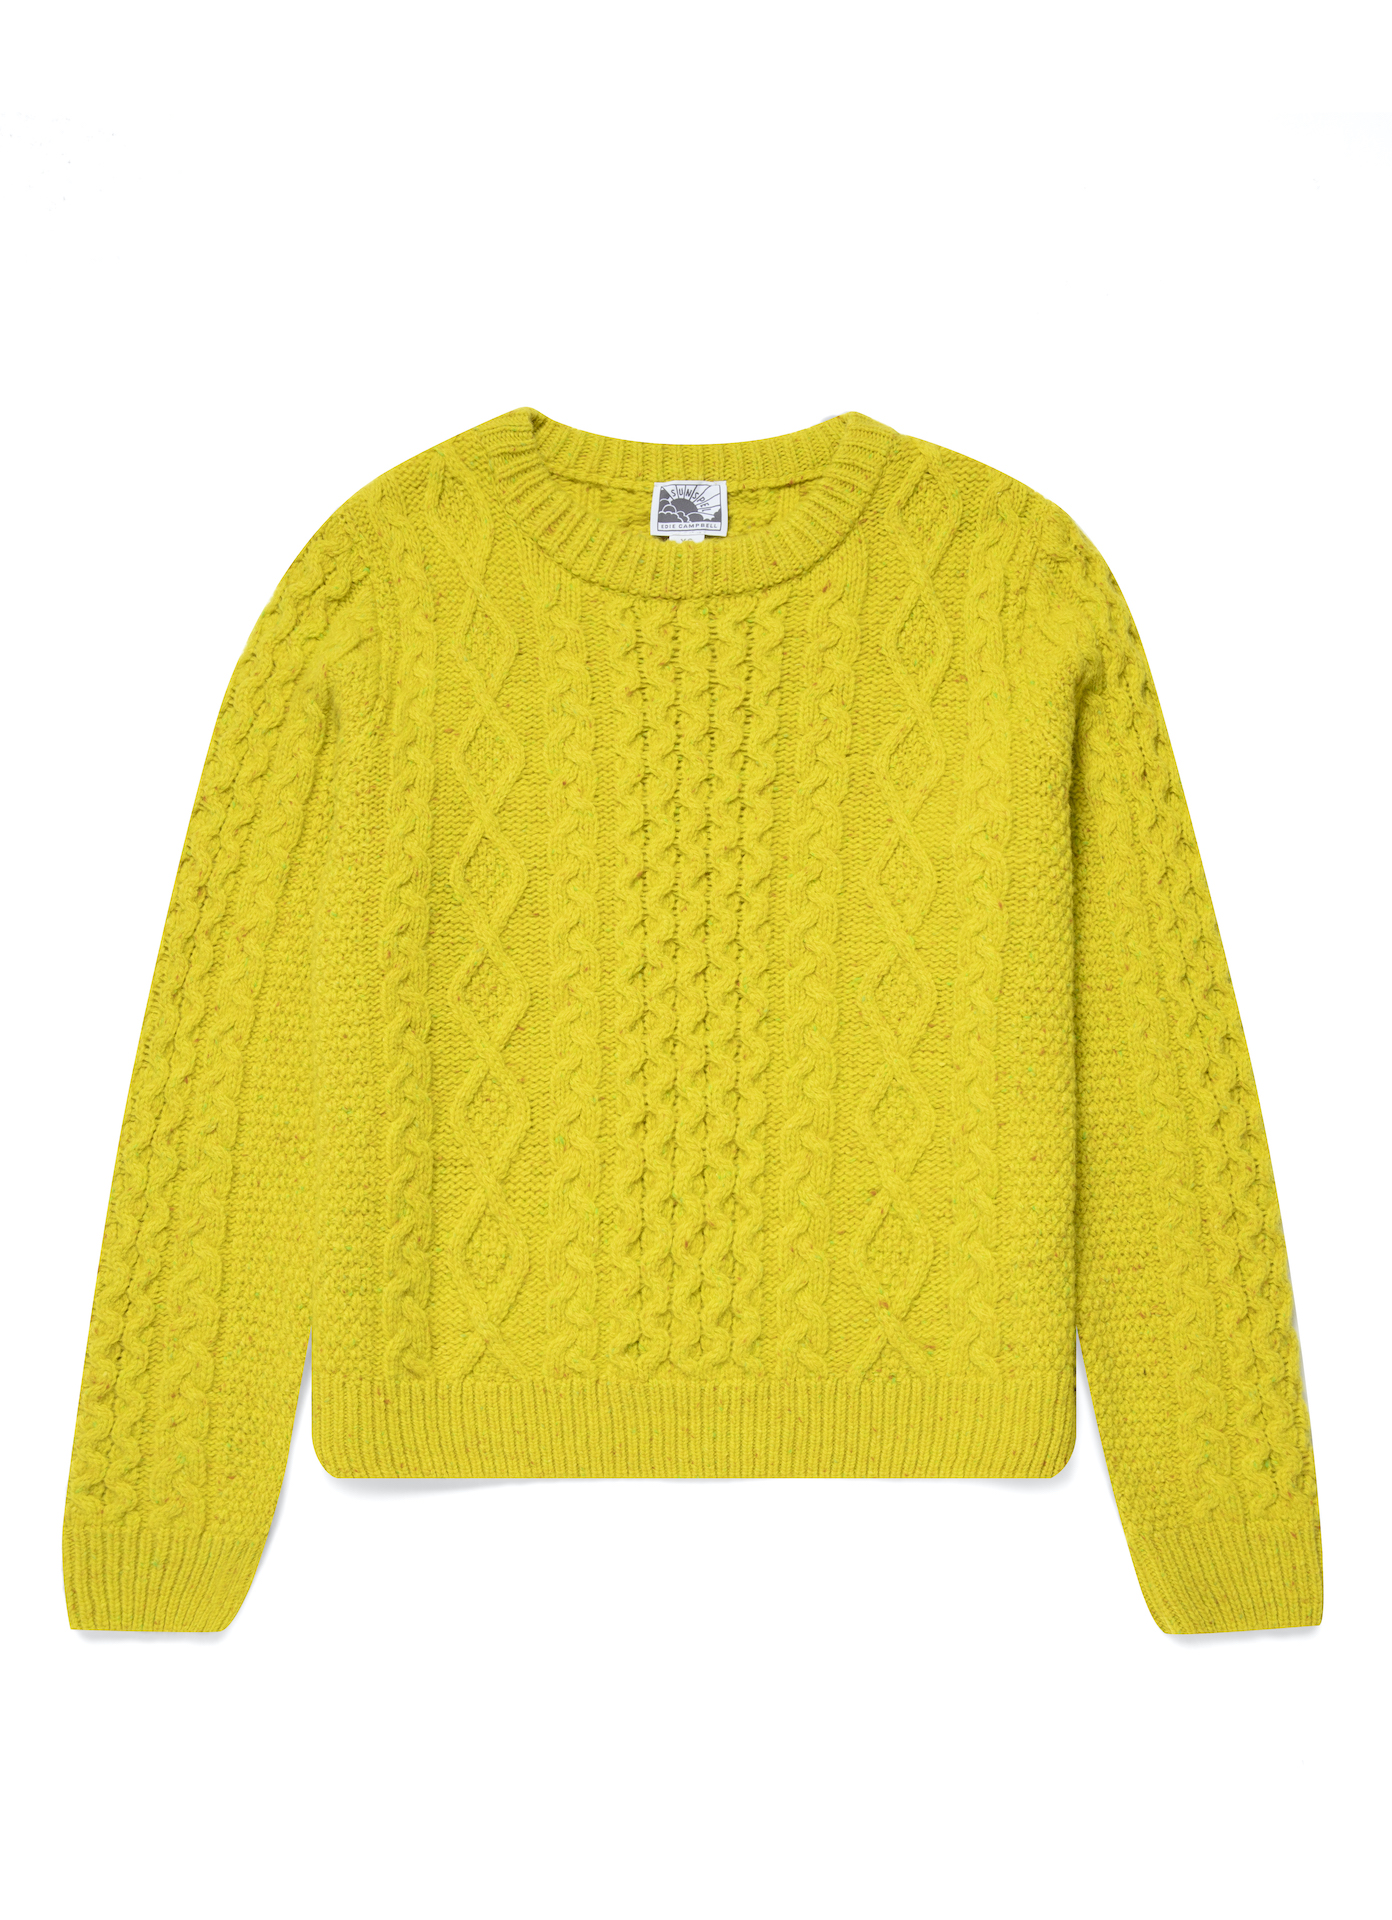 Sunspel Cable Knit